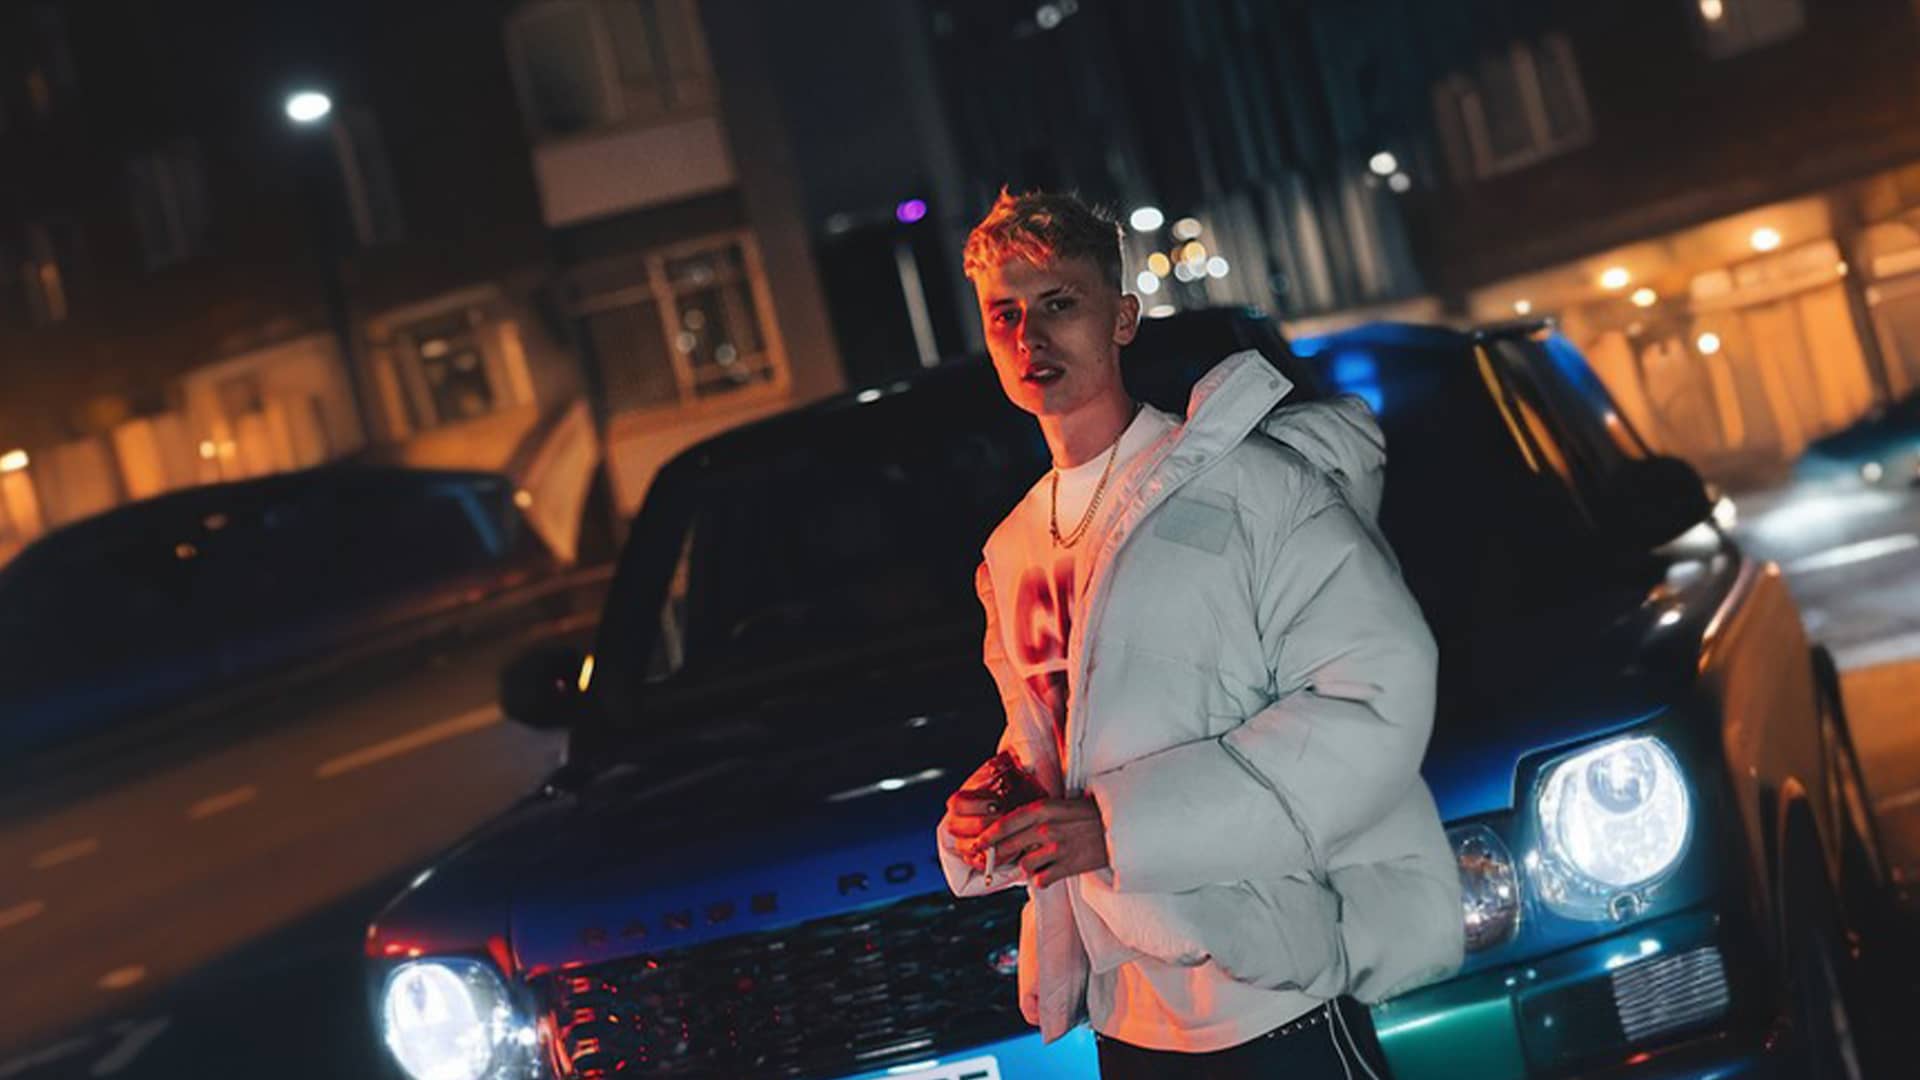 JusHarry New Place Hip Hop Artist with Landrover at Night